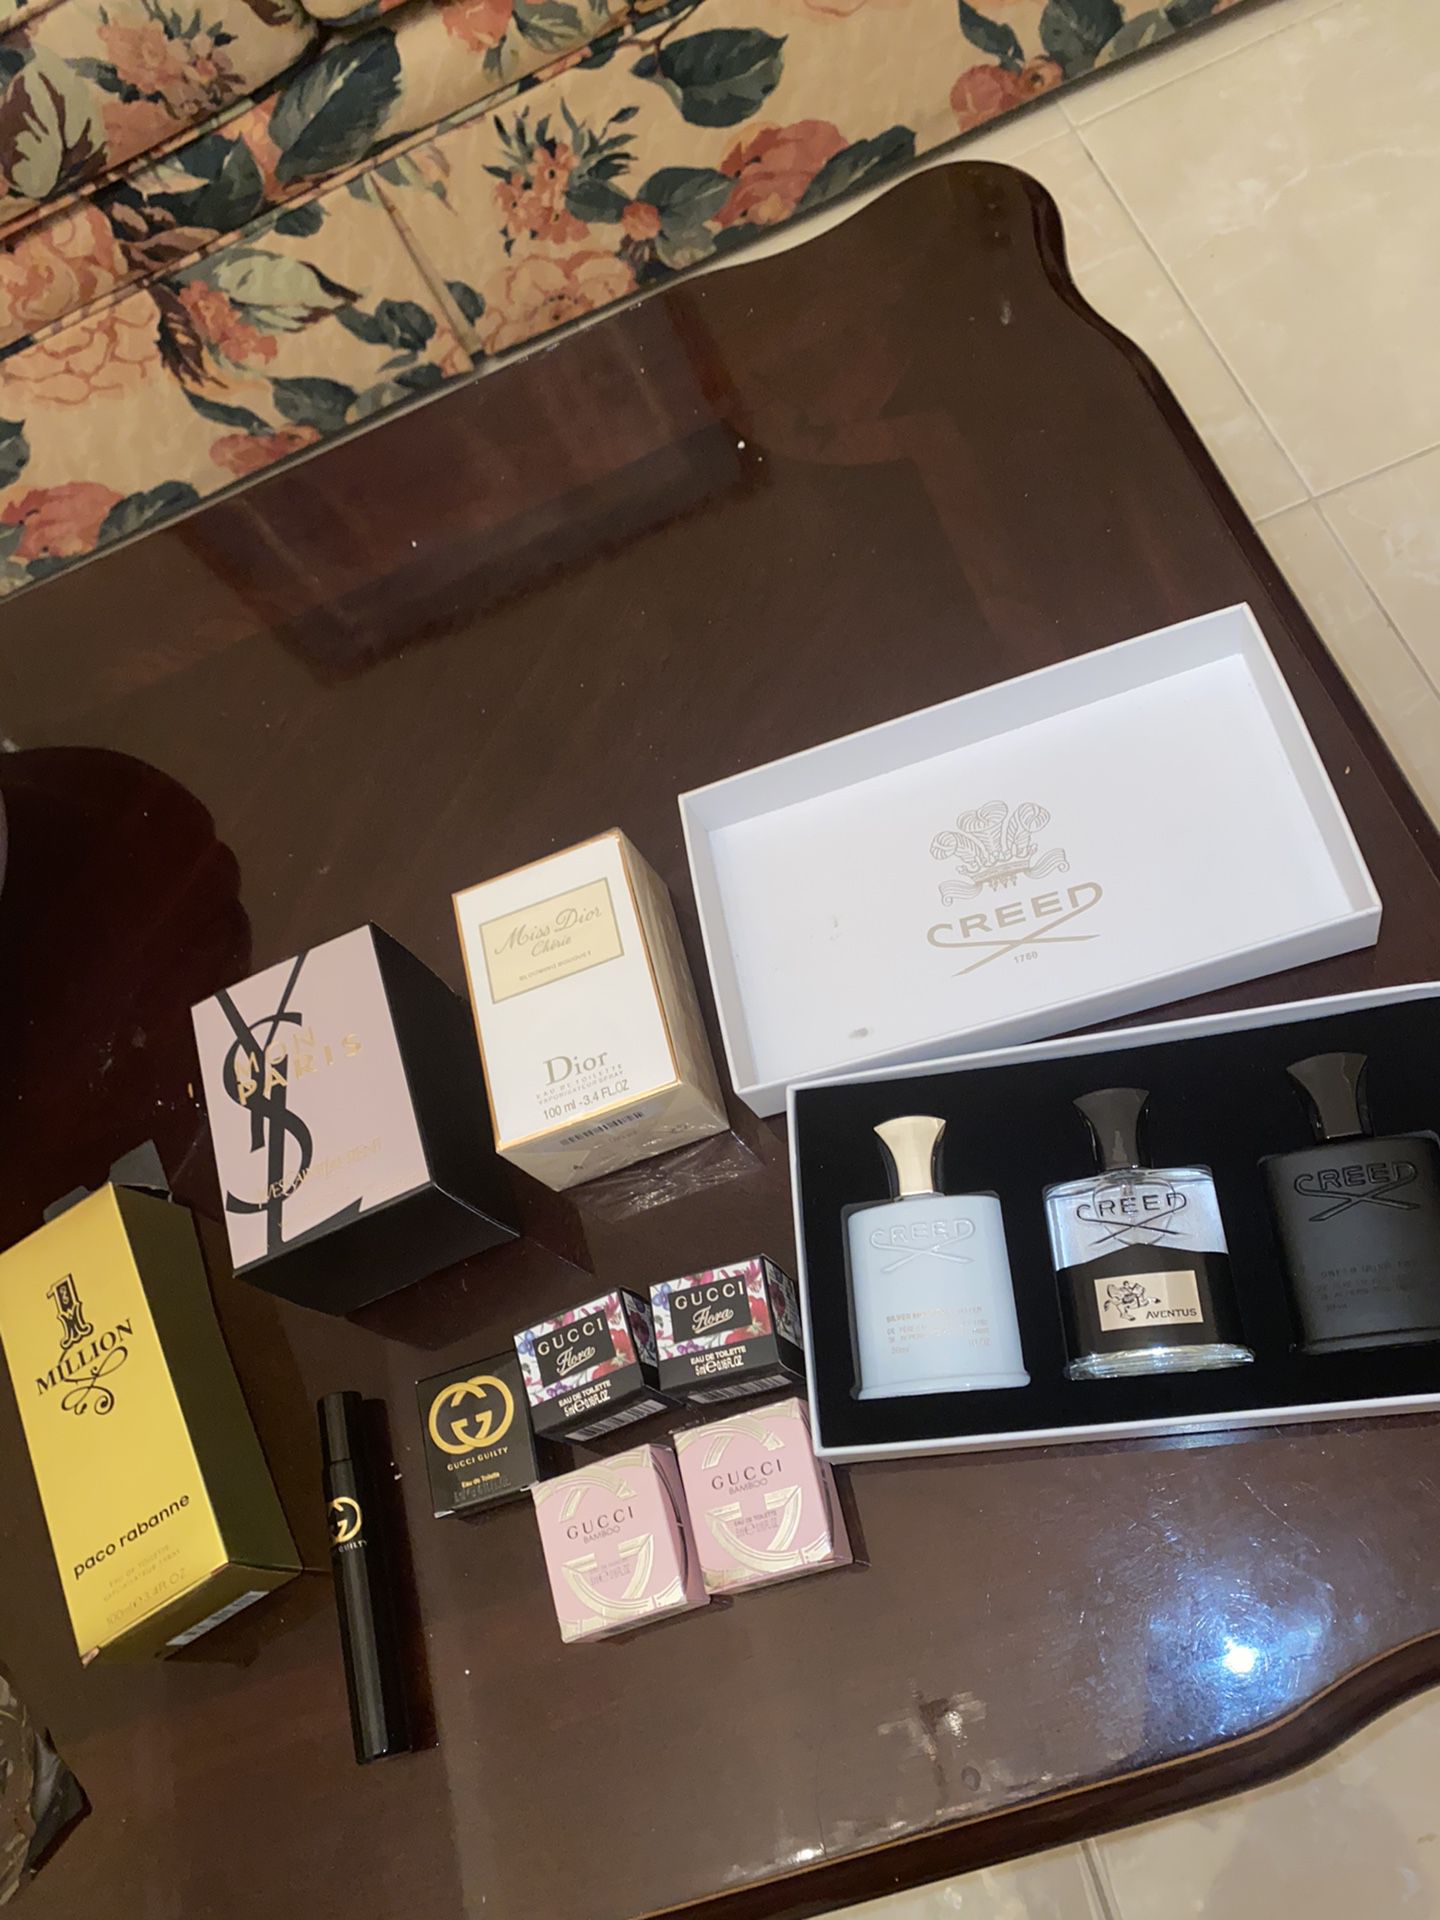 AUTHENTIC DESIGNER COLOGNES AND PERFUMES $65 EACH (Creed Aventus, Miss Dior, YSL, 1 Million, Gucci Guilty/Gucci Bamboo/Gucci Flora)